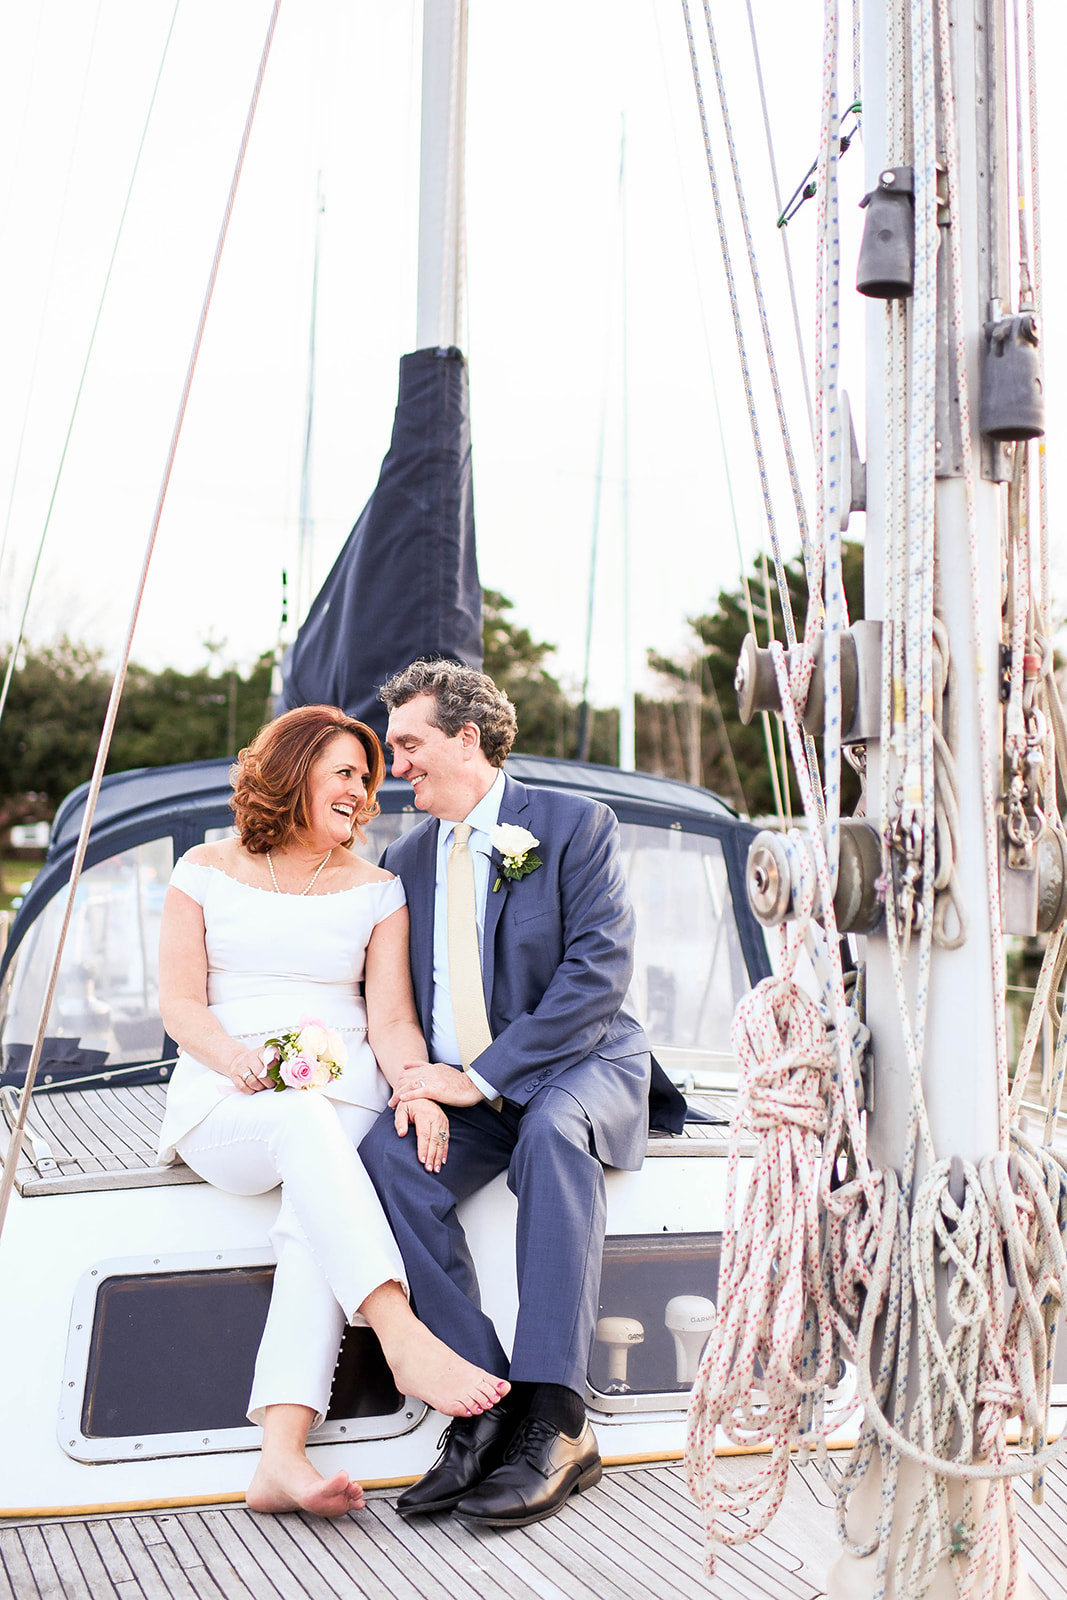 Bride and groom on sailboat